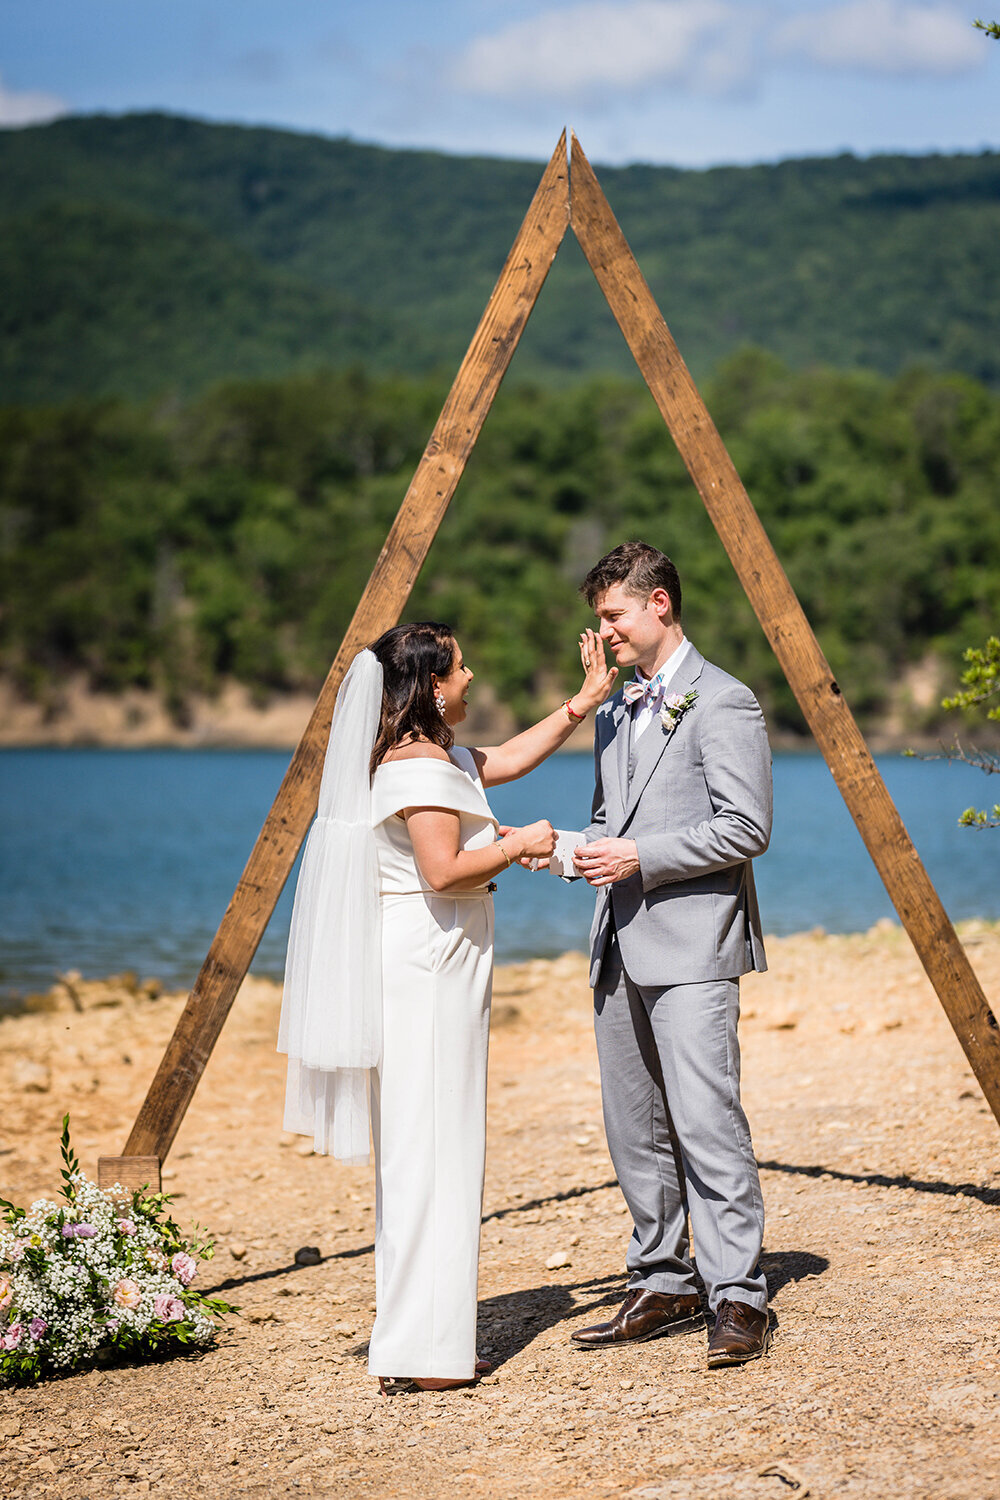 A marrier wipes a tear away from her partner’s face as they each read vows to one another under a triangle arch on Carvin’s Cove in Roanoke, Virginia.